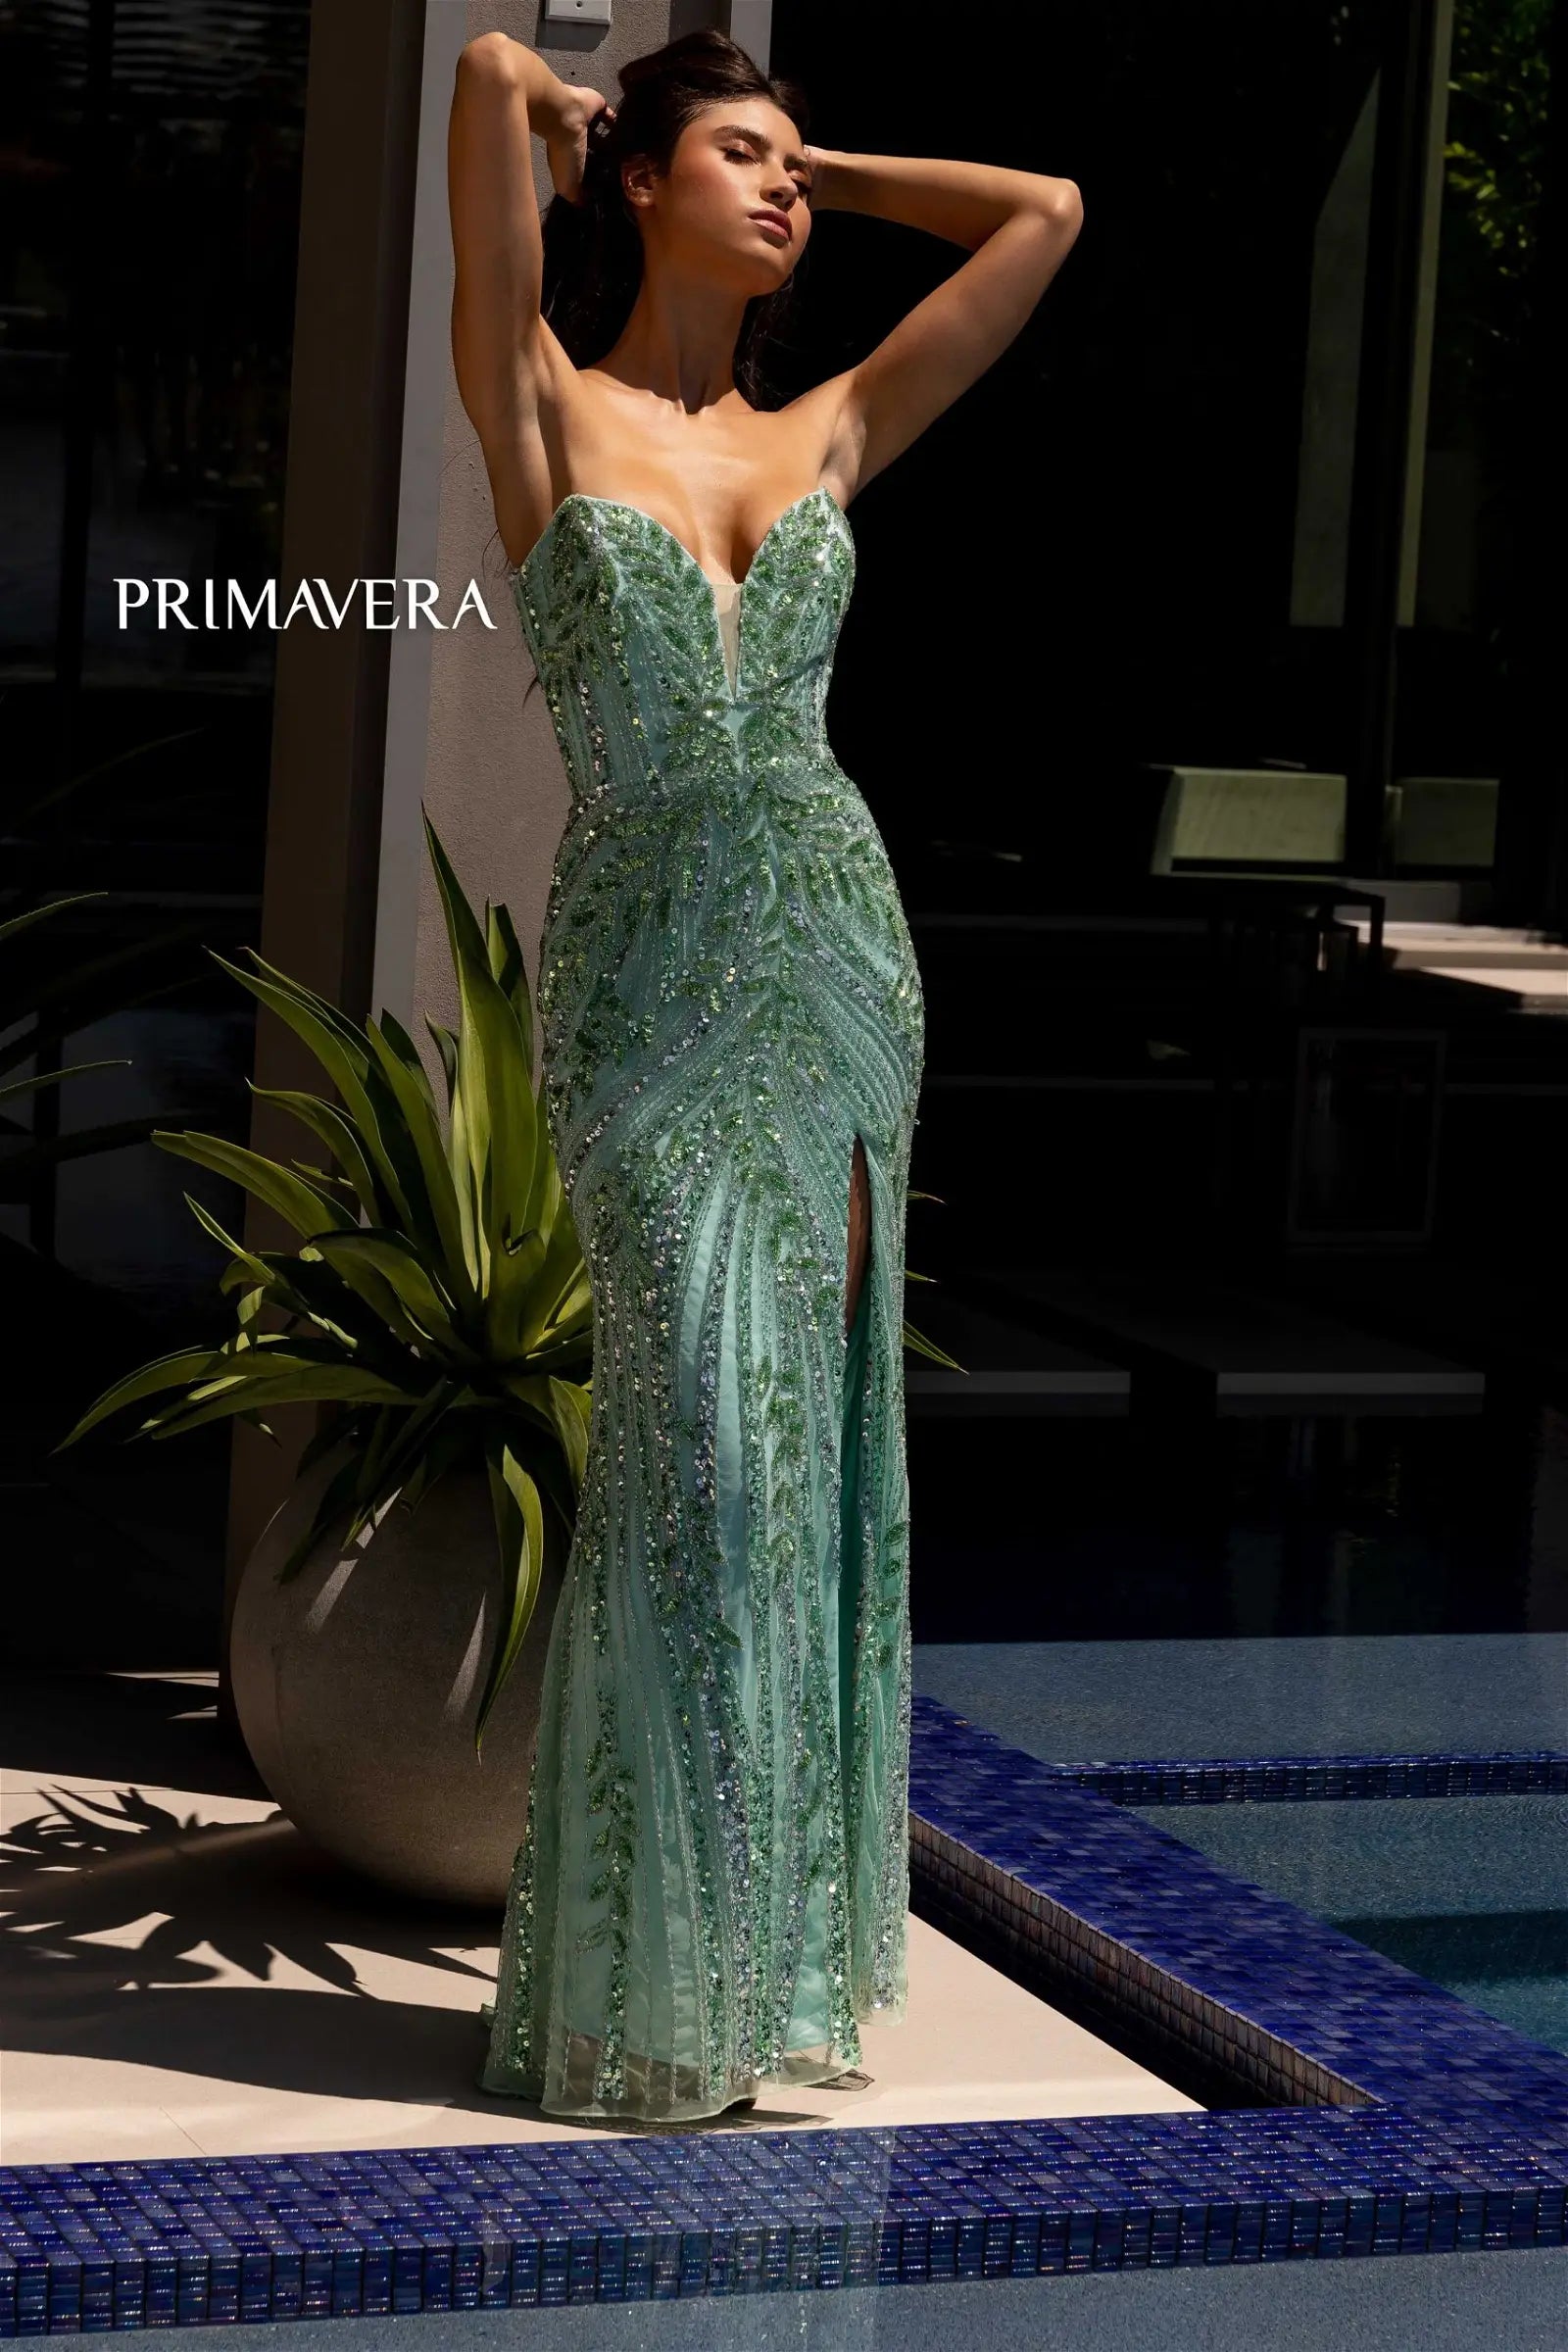 Expertly designed by Primavera Couture, the 4134 Long Prom Dress combines a sequined, fitted silhouette with a high slit and strapless design for a formal, pageant-worthy look. Stand out from the crowd with this elegant gown, perfect for a glamorous night out or special occasion.